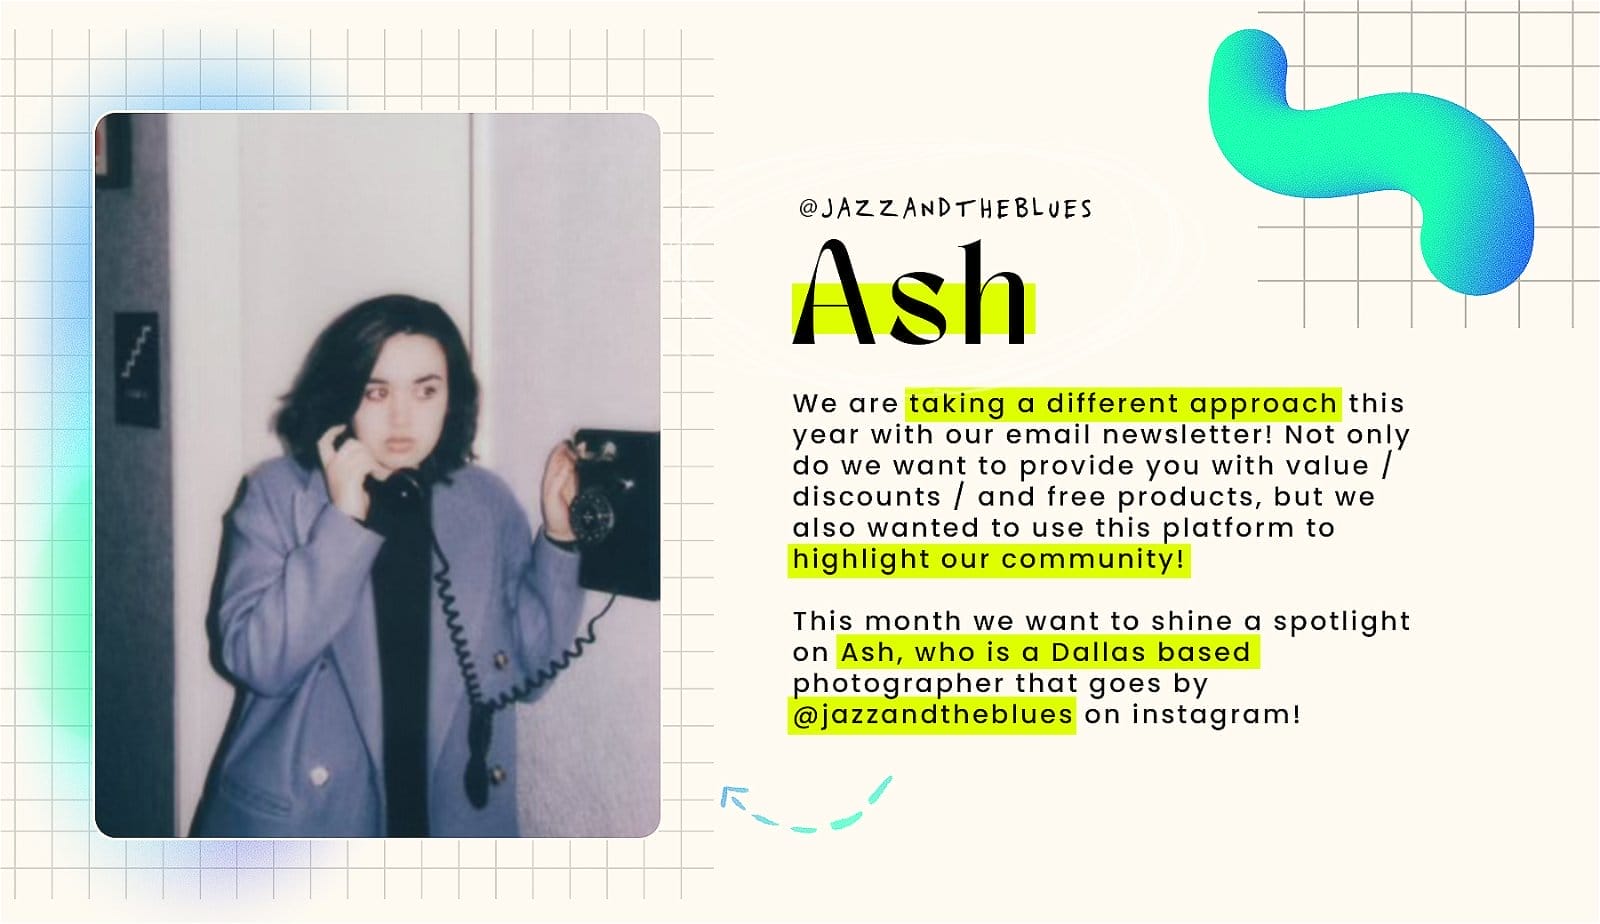 We are taking a different approach this year with our email newsletter. This month we want to shine a spotlight on Ash